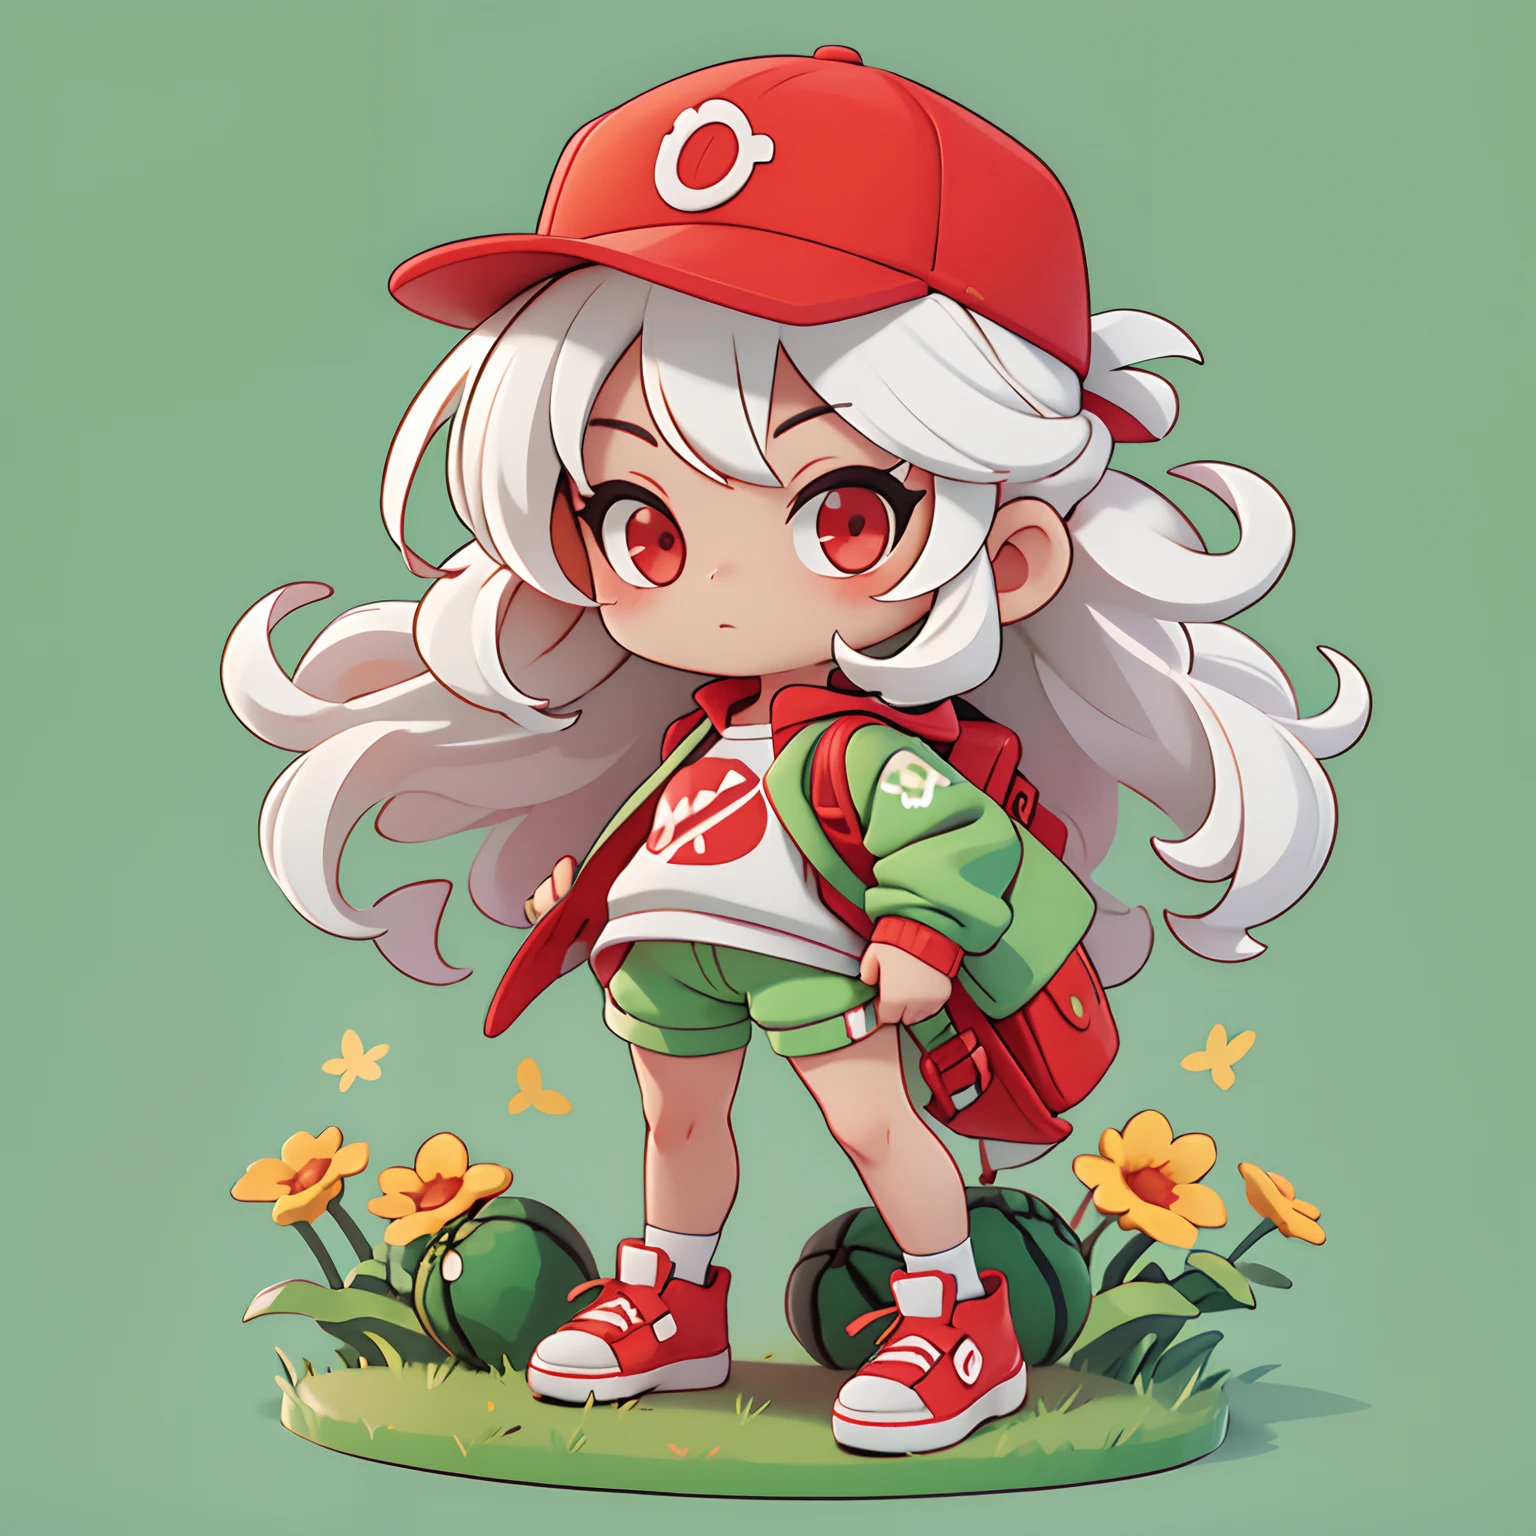 (tchibi:1),Cute,field of flowers background,1girll, Solo, Long_Hair, Looking_at_peeping at the viewer, Red_Eyes, Hat, Jacket, full_Body, White_Hair, shoes, Shorts, tchibi, bag, Backpack, Sneakers, Red_Footwear, baseball_wear cap, Red_Headwear, curly_Hair, Green_Shorts, Keychain，Watermelon element